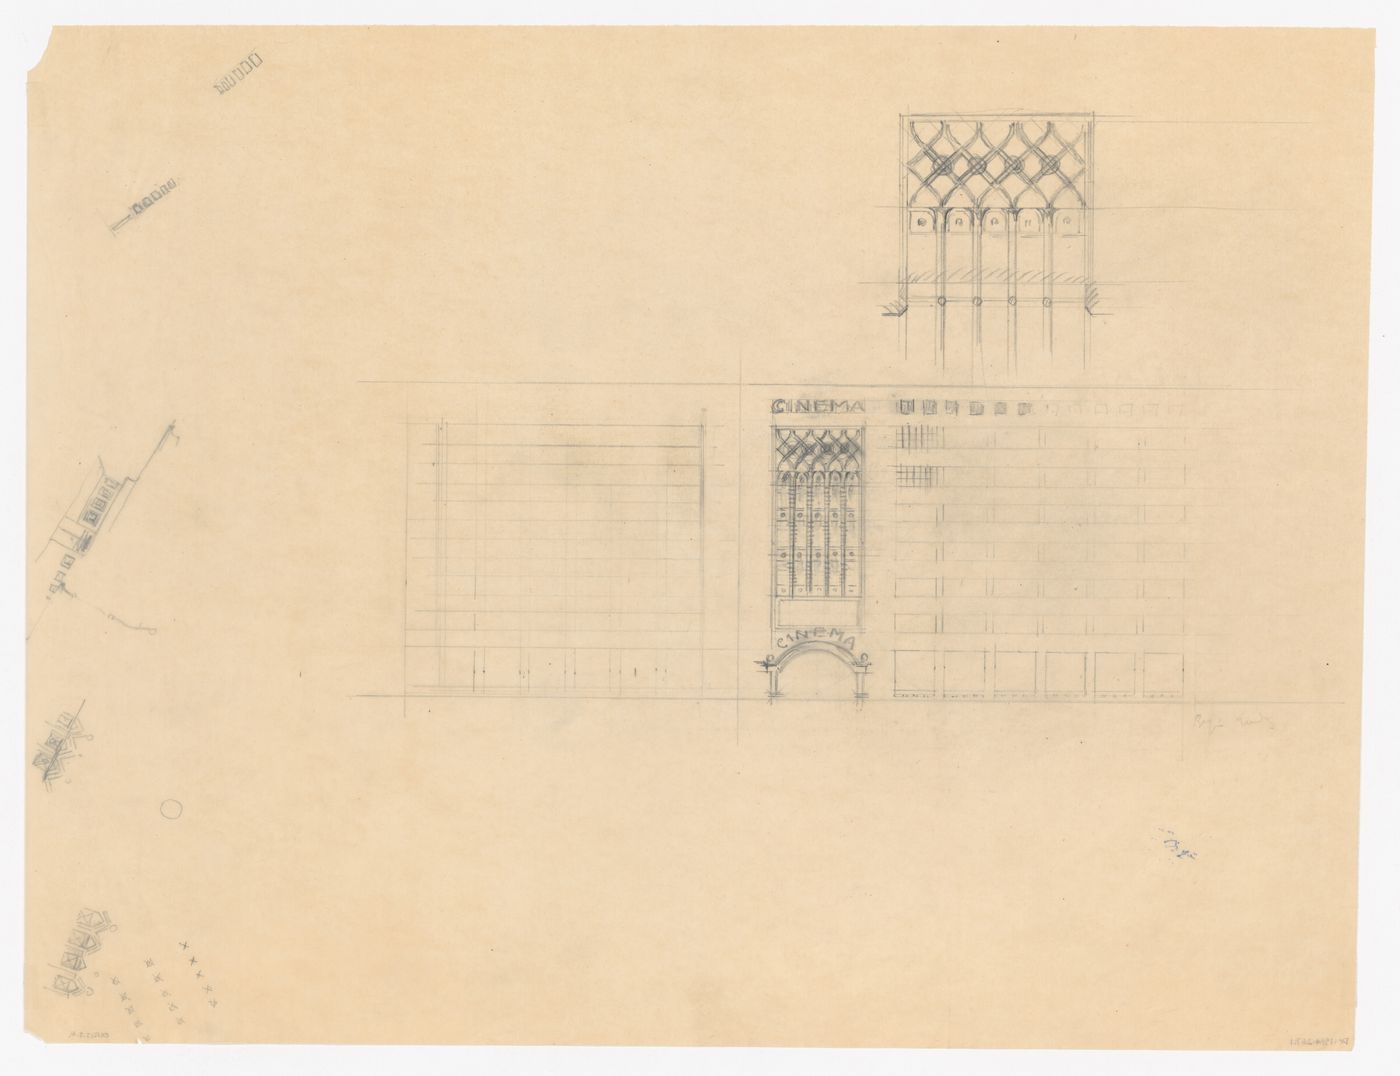 Sketch elevation and detail for exterior ornament for a model for a cinema for the reconstruction of the Hofplein (city centre), Rotterdam, Netherlands